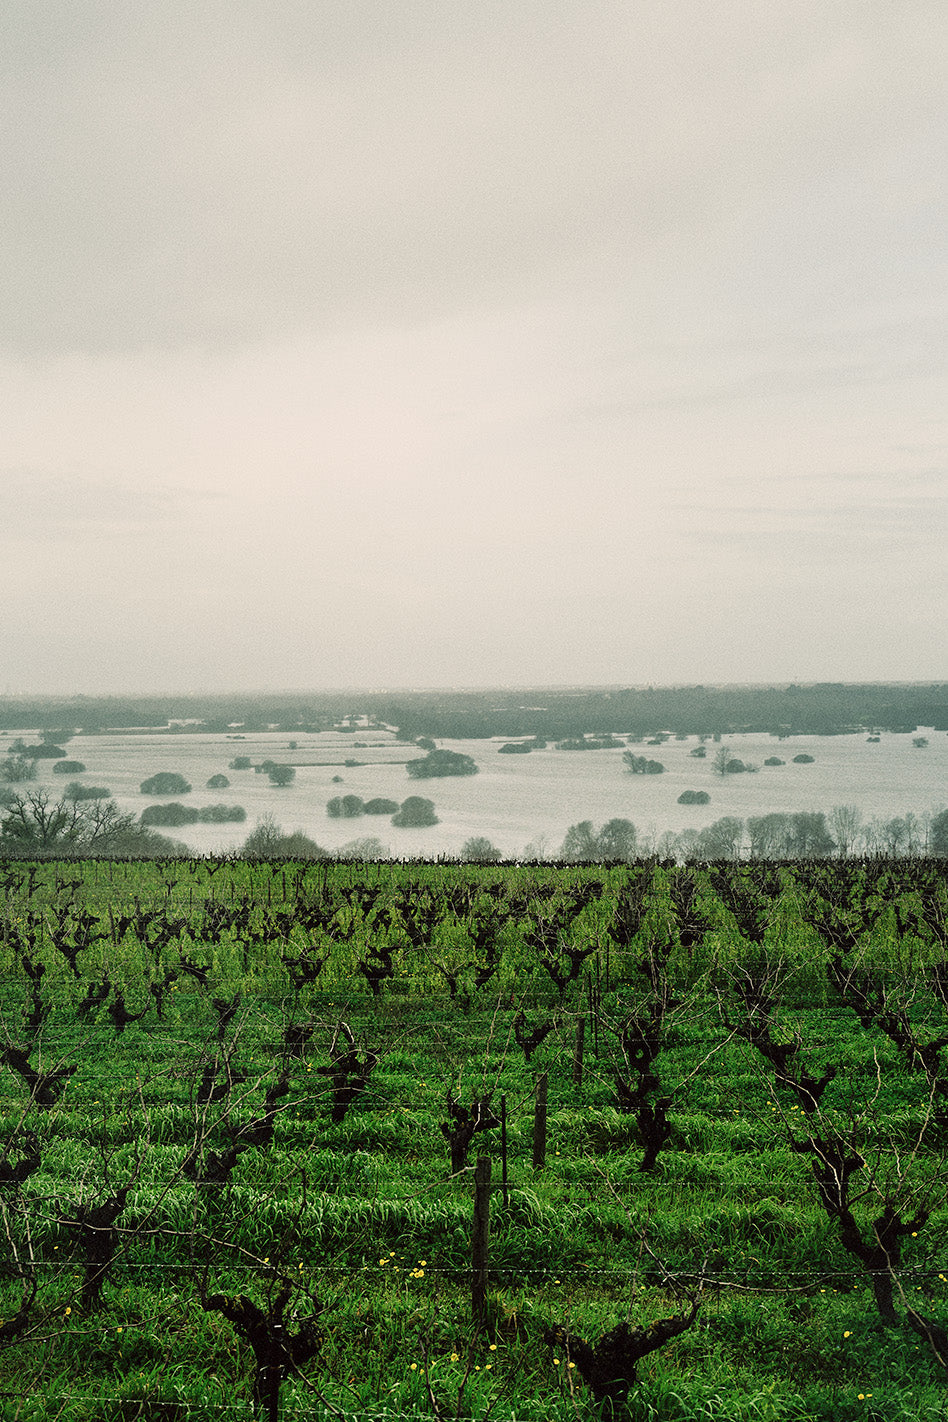 School of Rock: How Muscadet Reinvented Itself as a Serious Terroir Wine (Tuesday 14 May 2024)